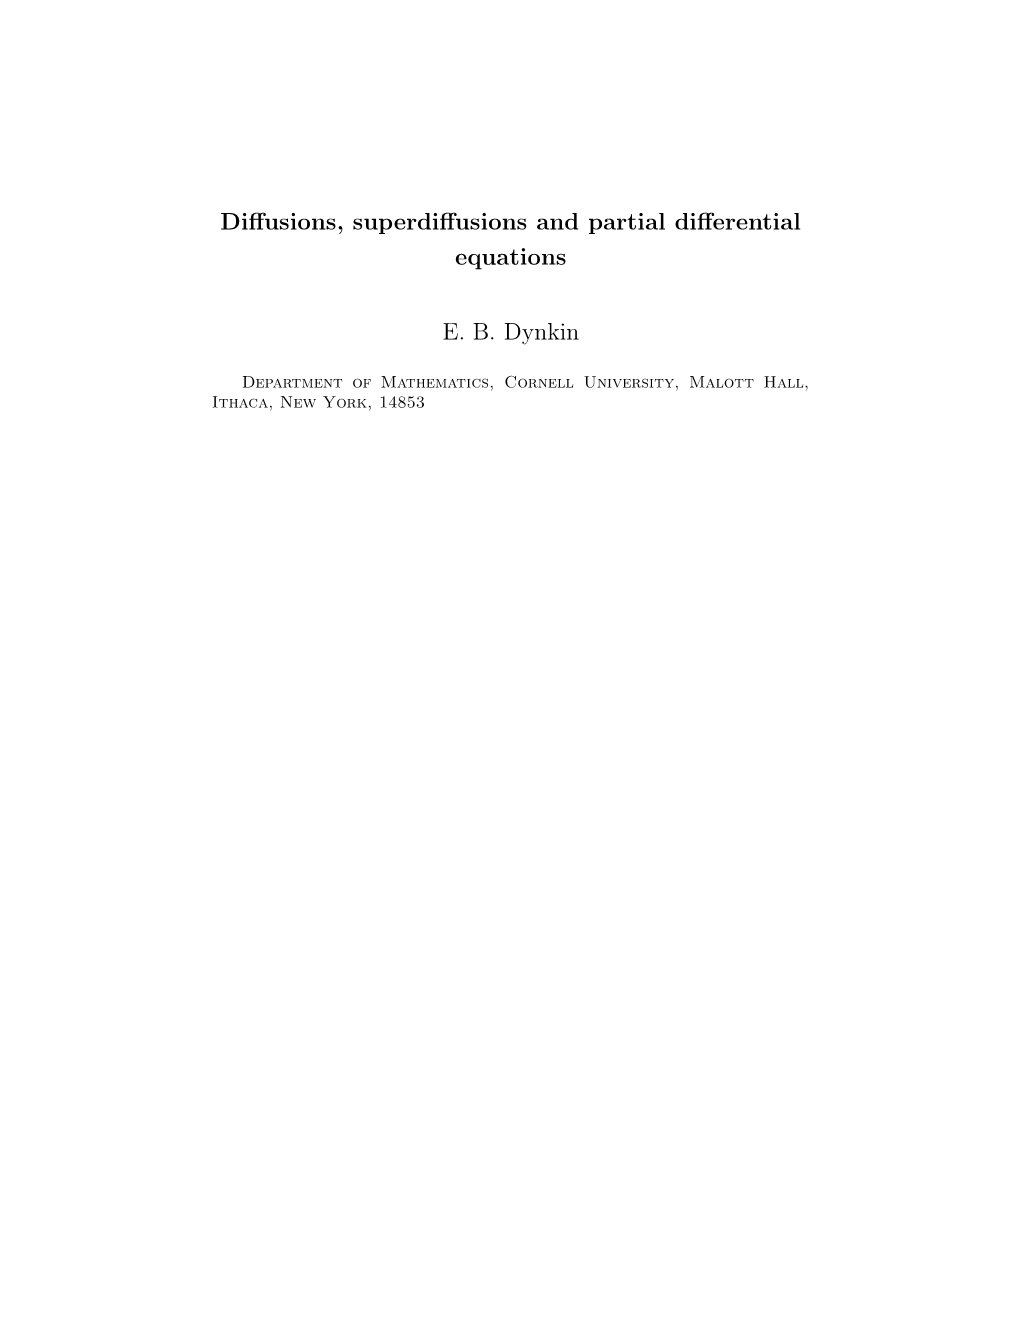 Diffusions, Superdiffusions and Partial Differential Equations E. B. Dynkin